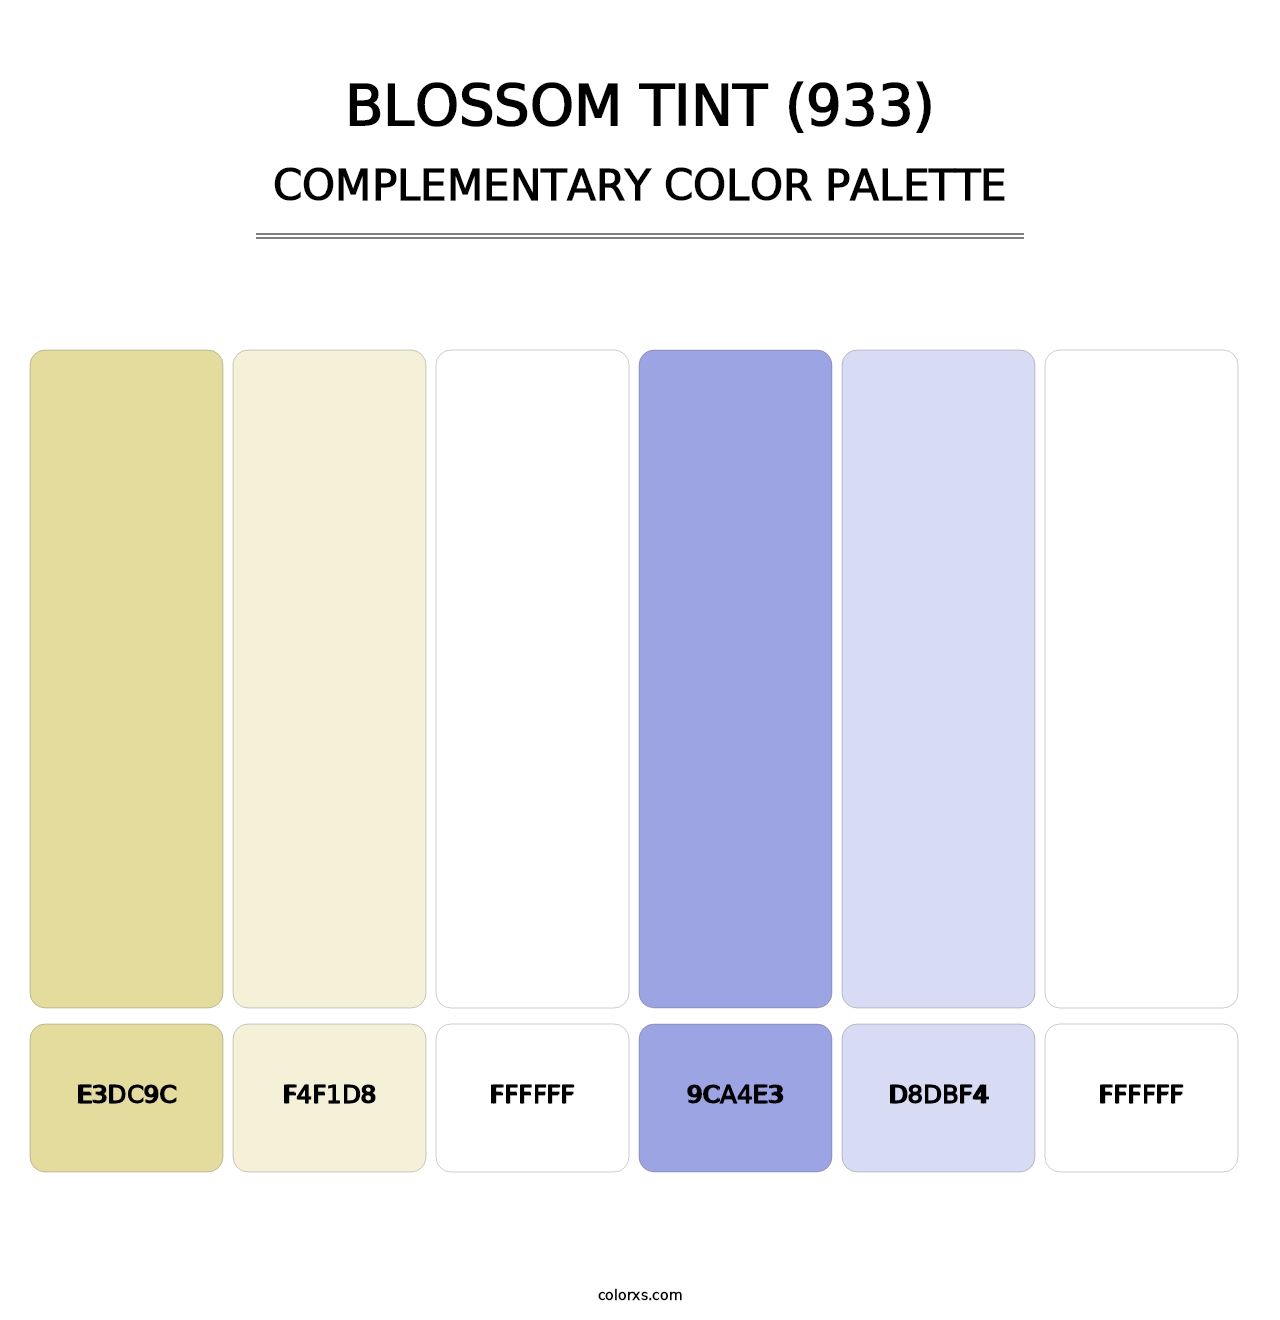 Blossom Tint (933) - Complementary Color Palette